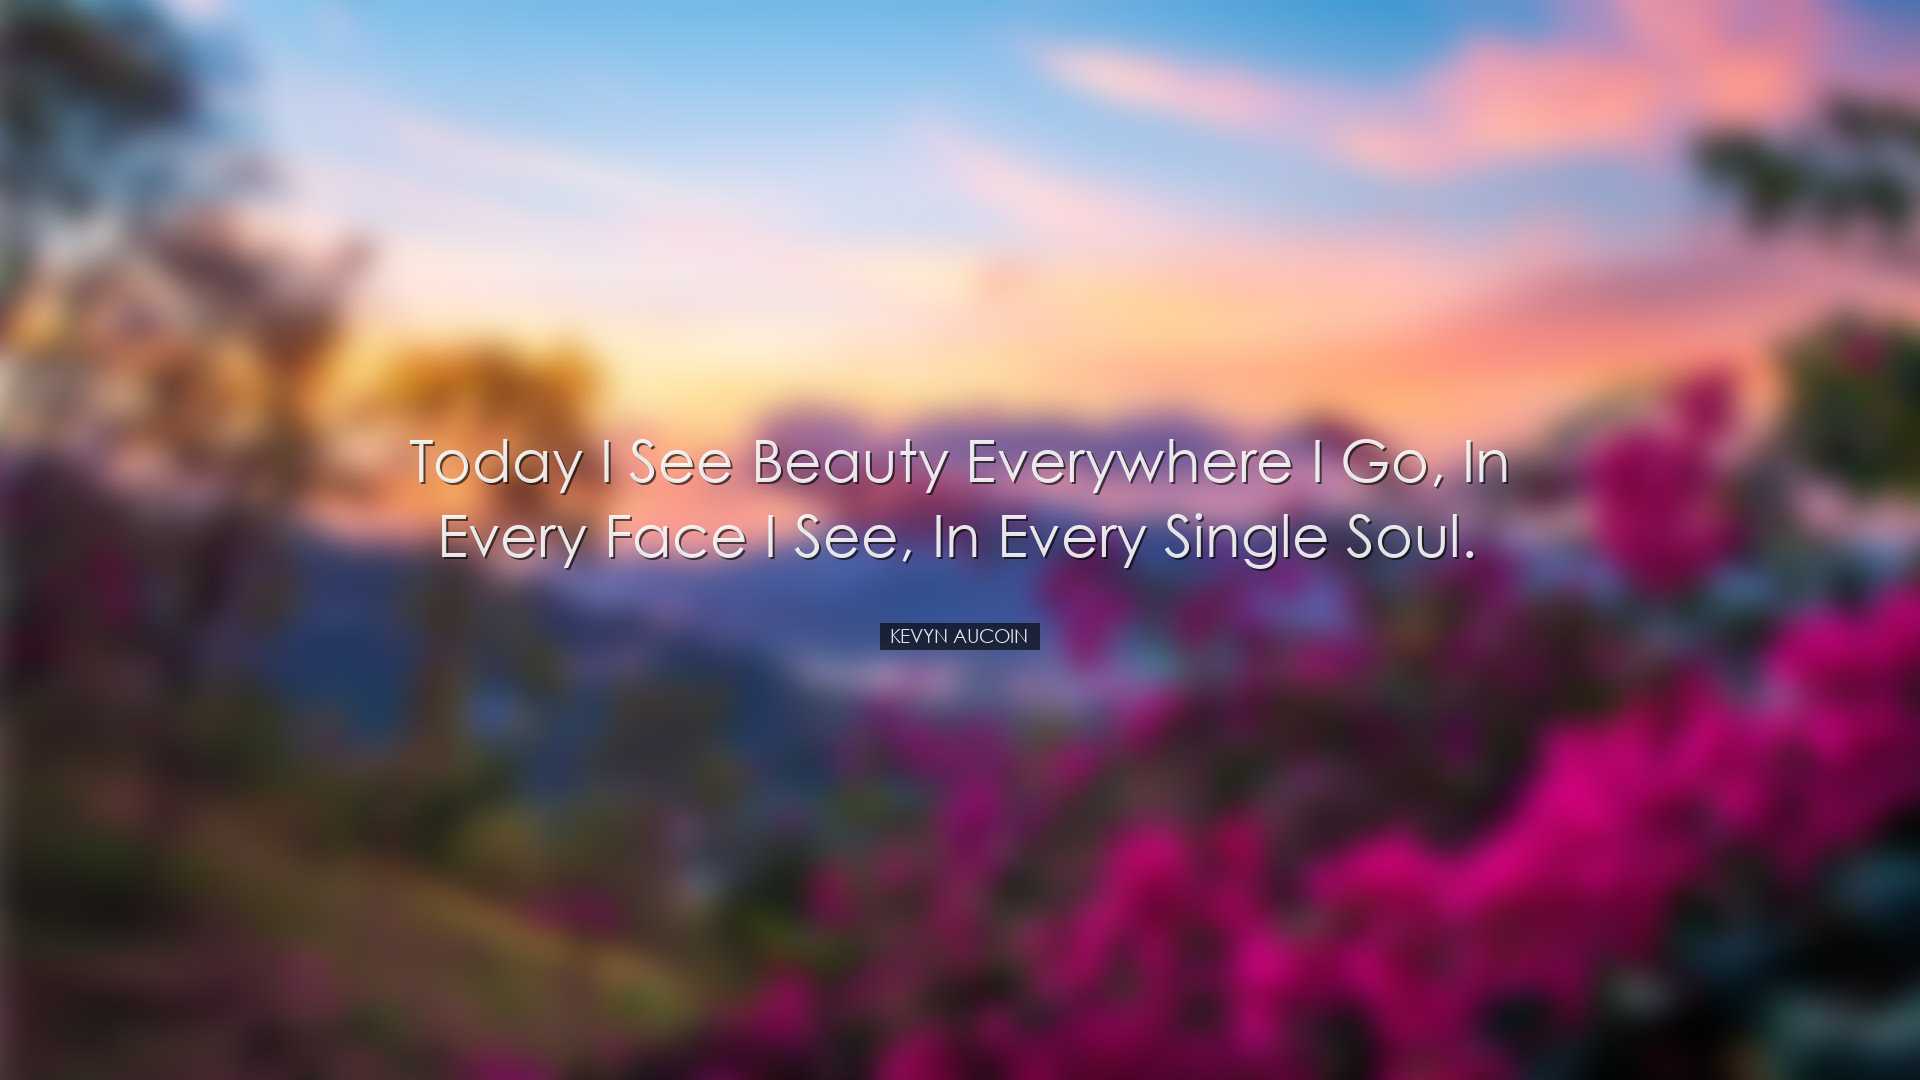 Today I see beauty everywhere I go, in every face I see, in every